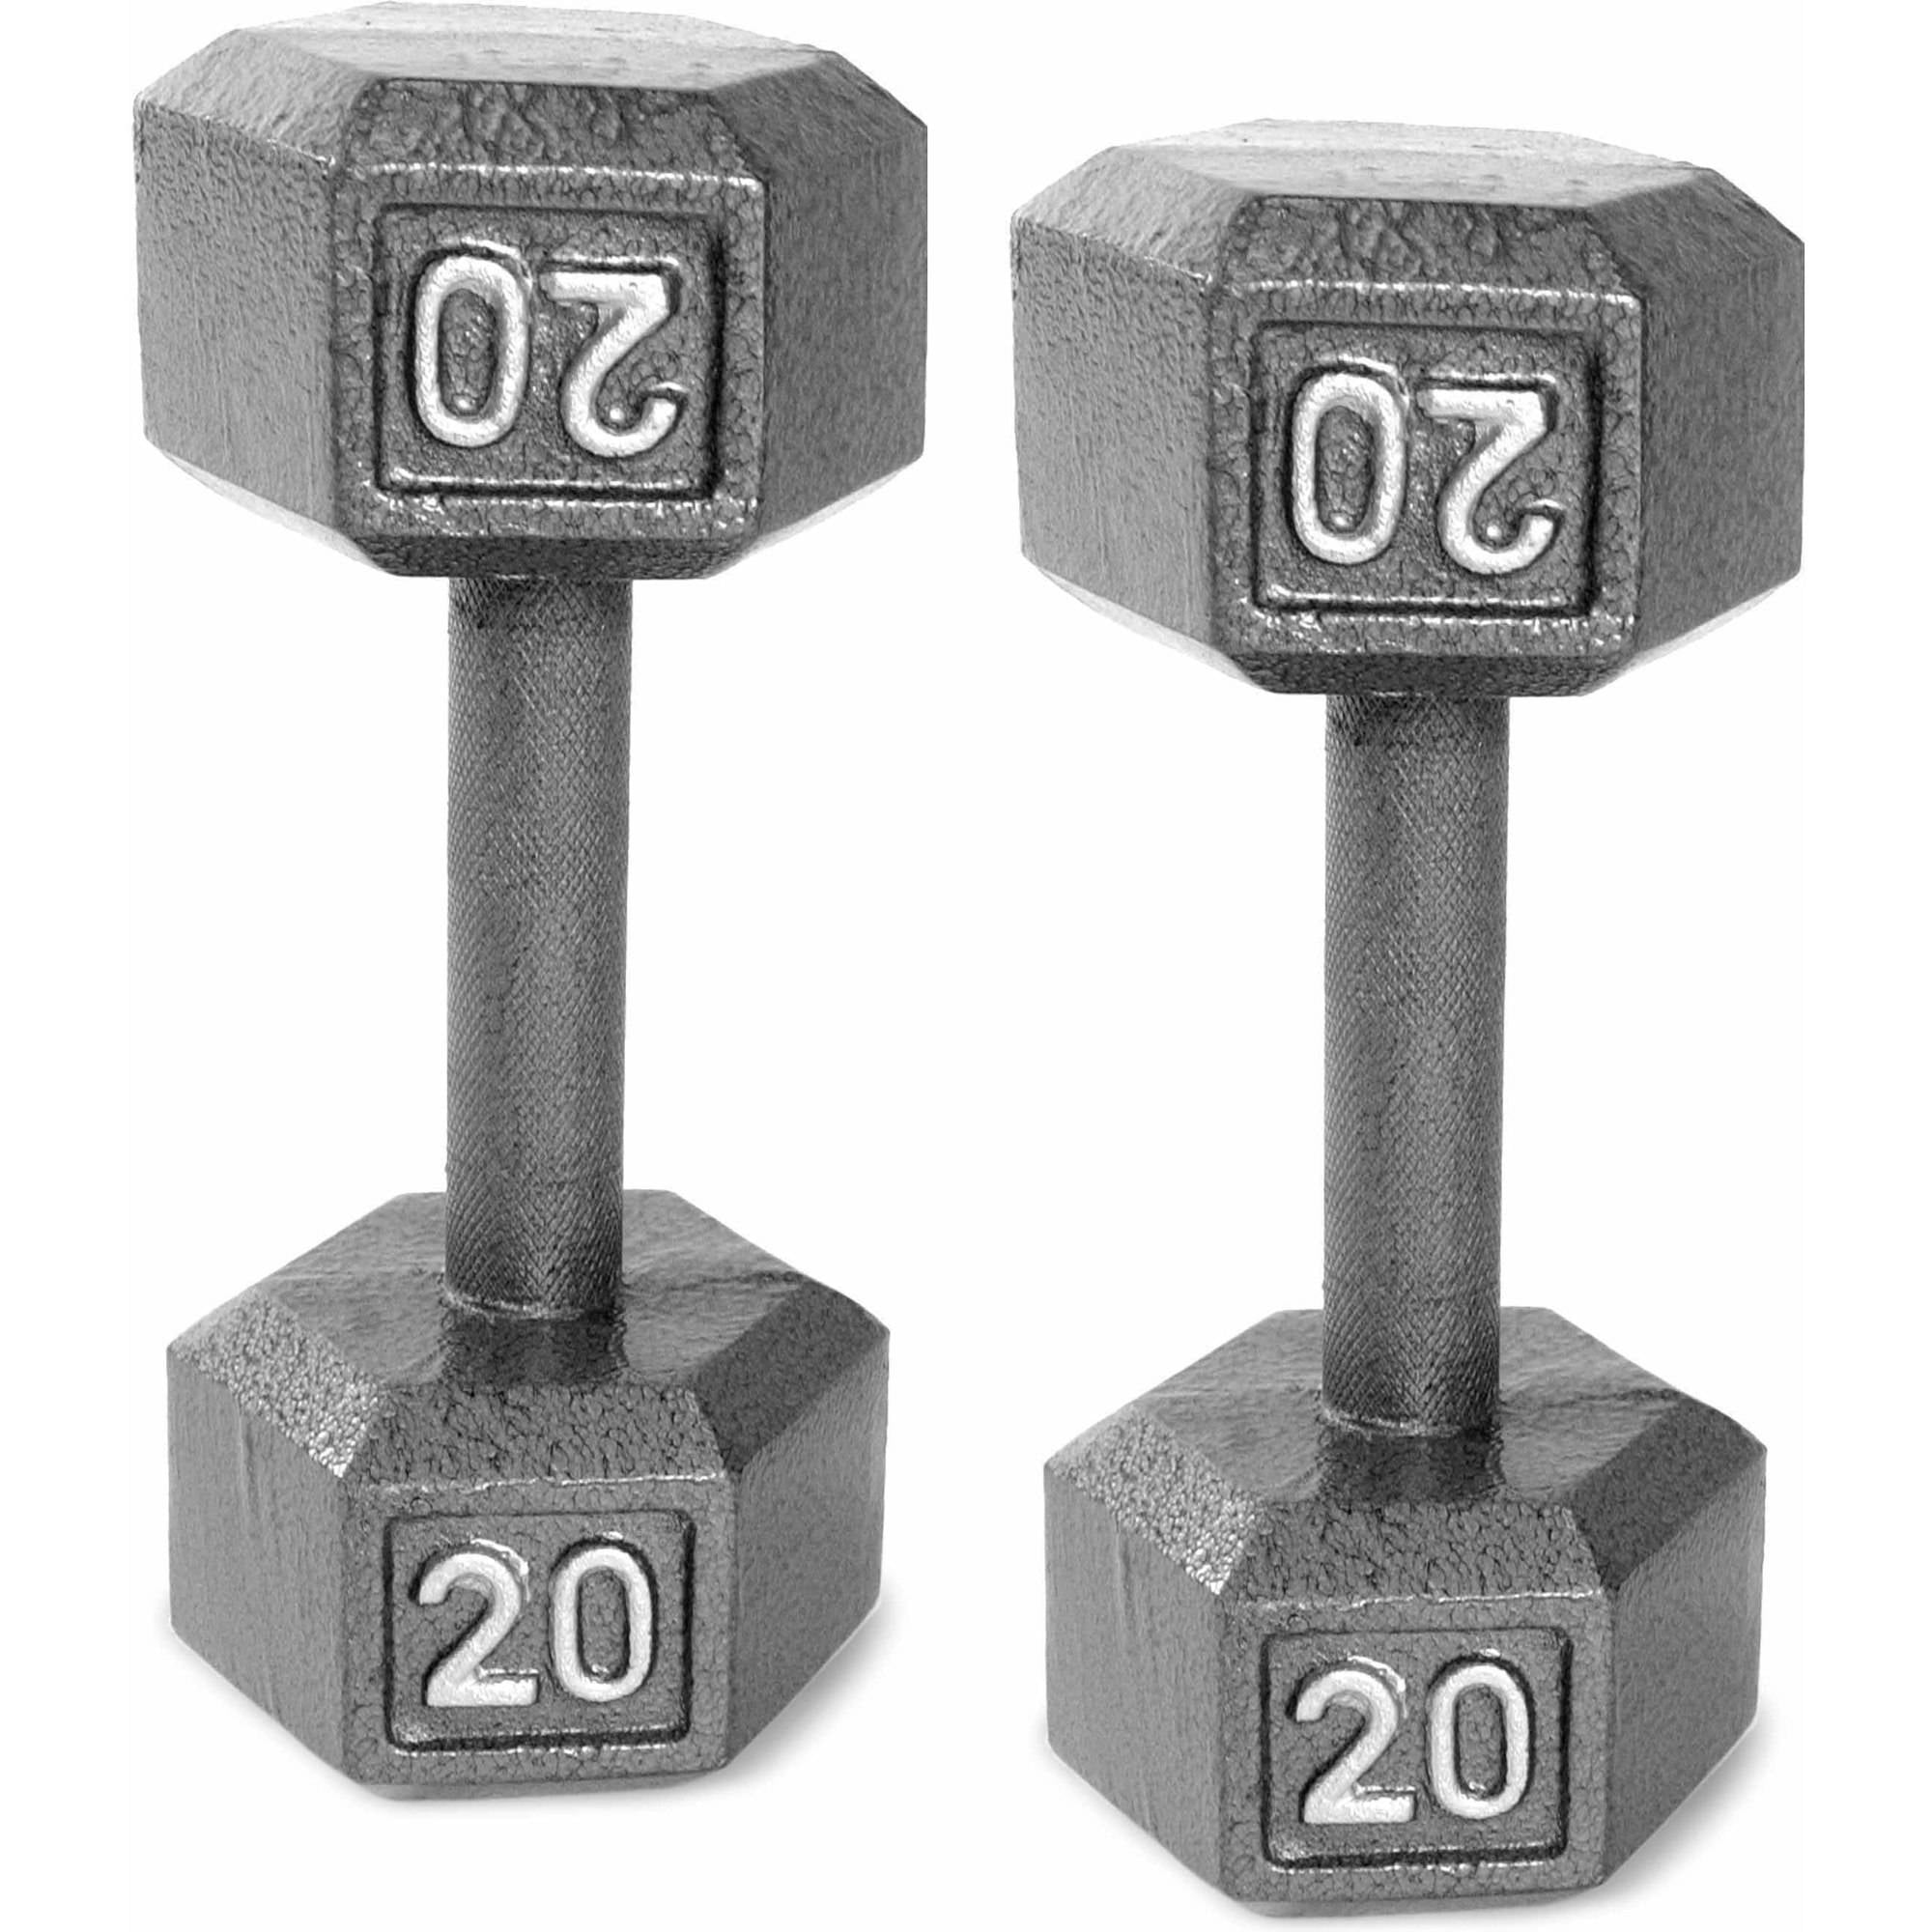 Multi-Select Weight Size Options Available Strength Training Free Weights Set of 2 for Women and Men CAP Barbell Cast Iron Solid Hexagon Gray Dumbbells Hand Weights Sold by Pairs from 1 to 120 LBS